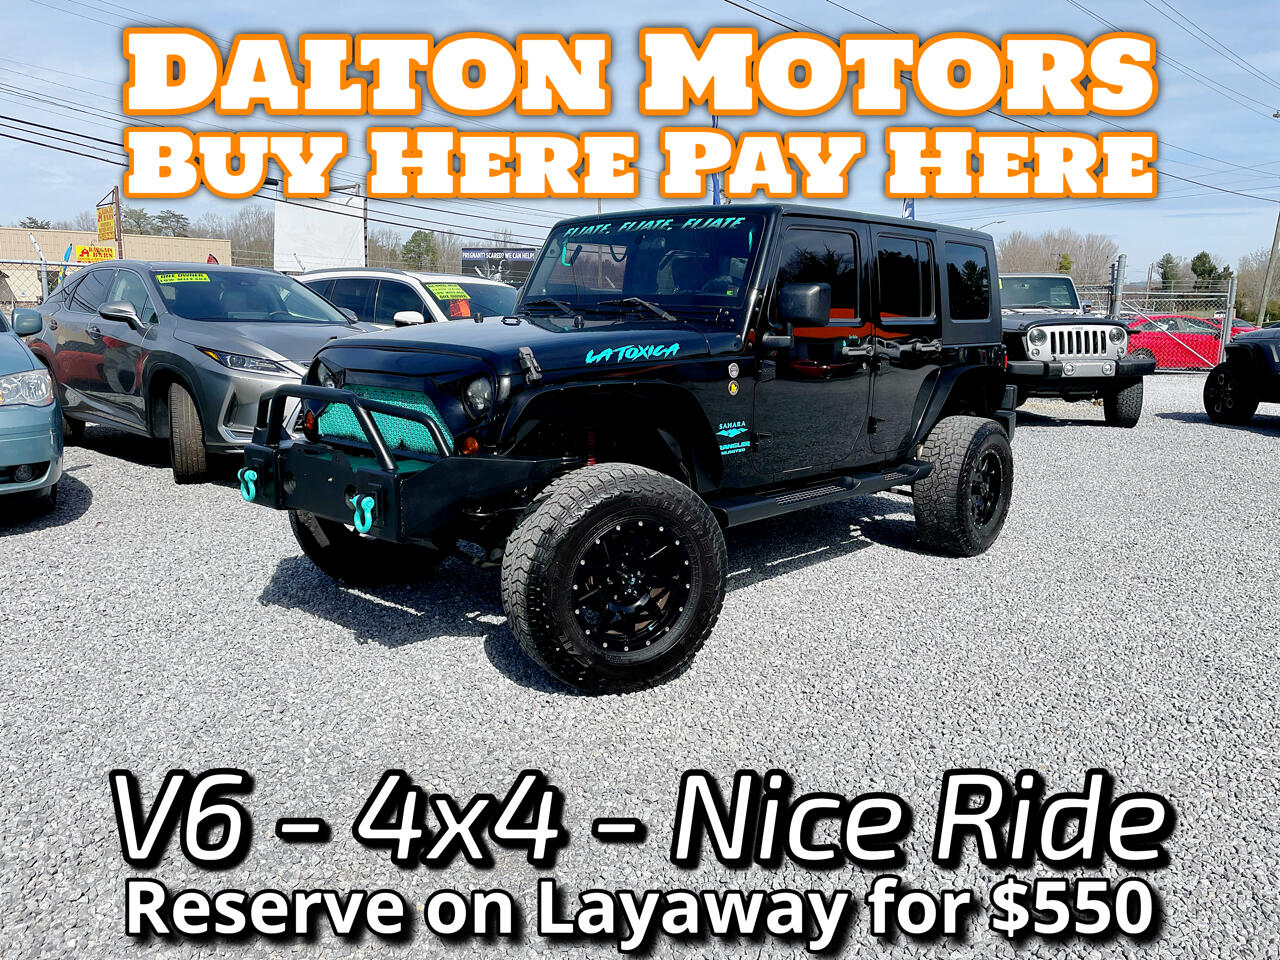 Buy Here Pay Here Cars for Sale Morristown TN 37814 Dalton Motors